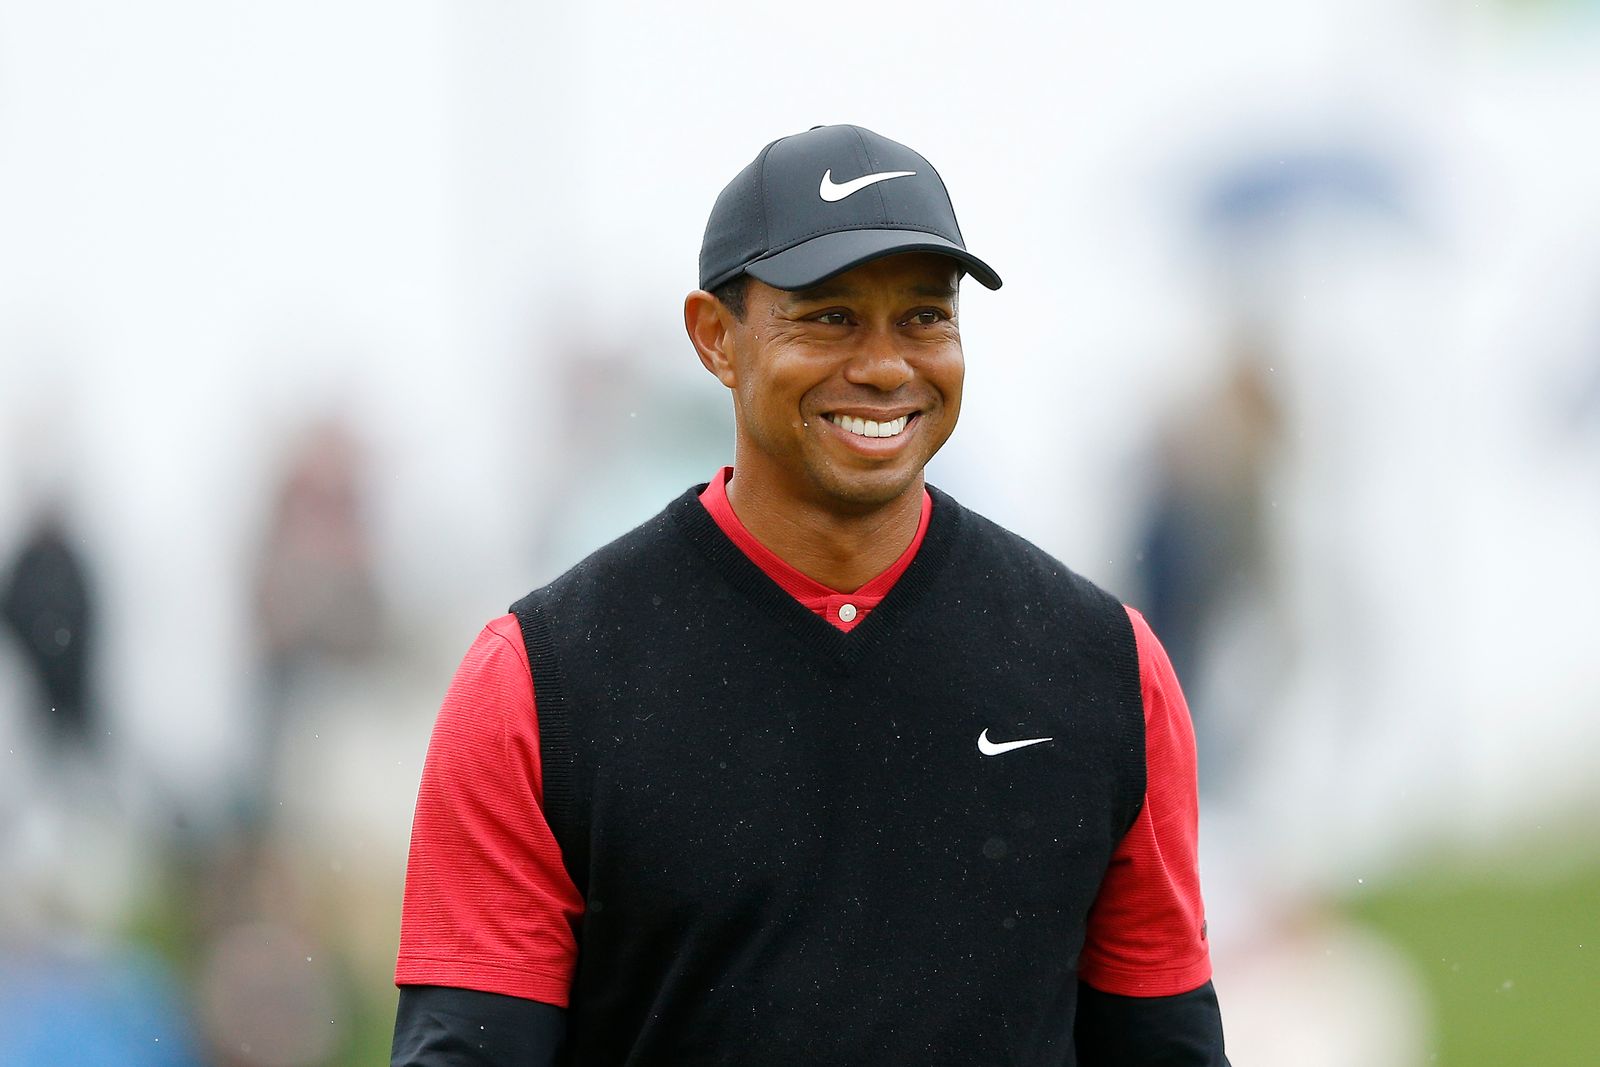 Tiger Woods' reaction after chipping in from the bunker on the third hole during the final round of The PLAYERS Championship at TPC Sawgrass on March 17, 2019. | Source: Getty Images